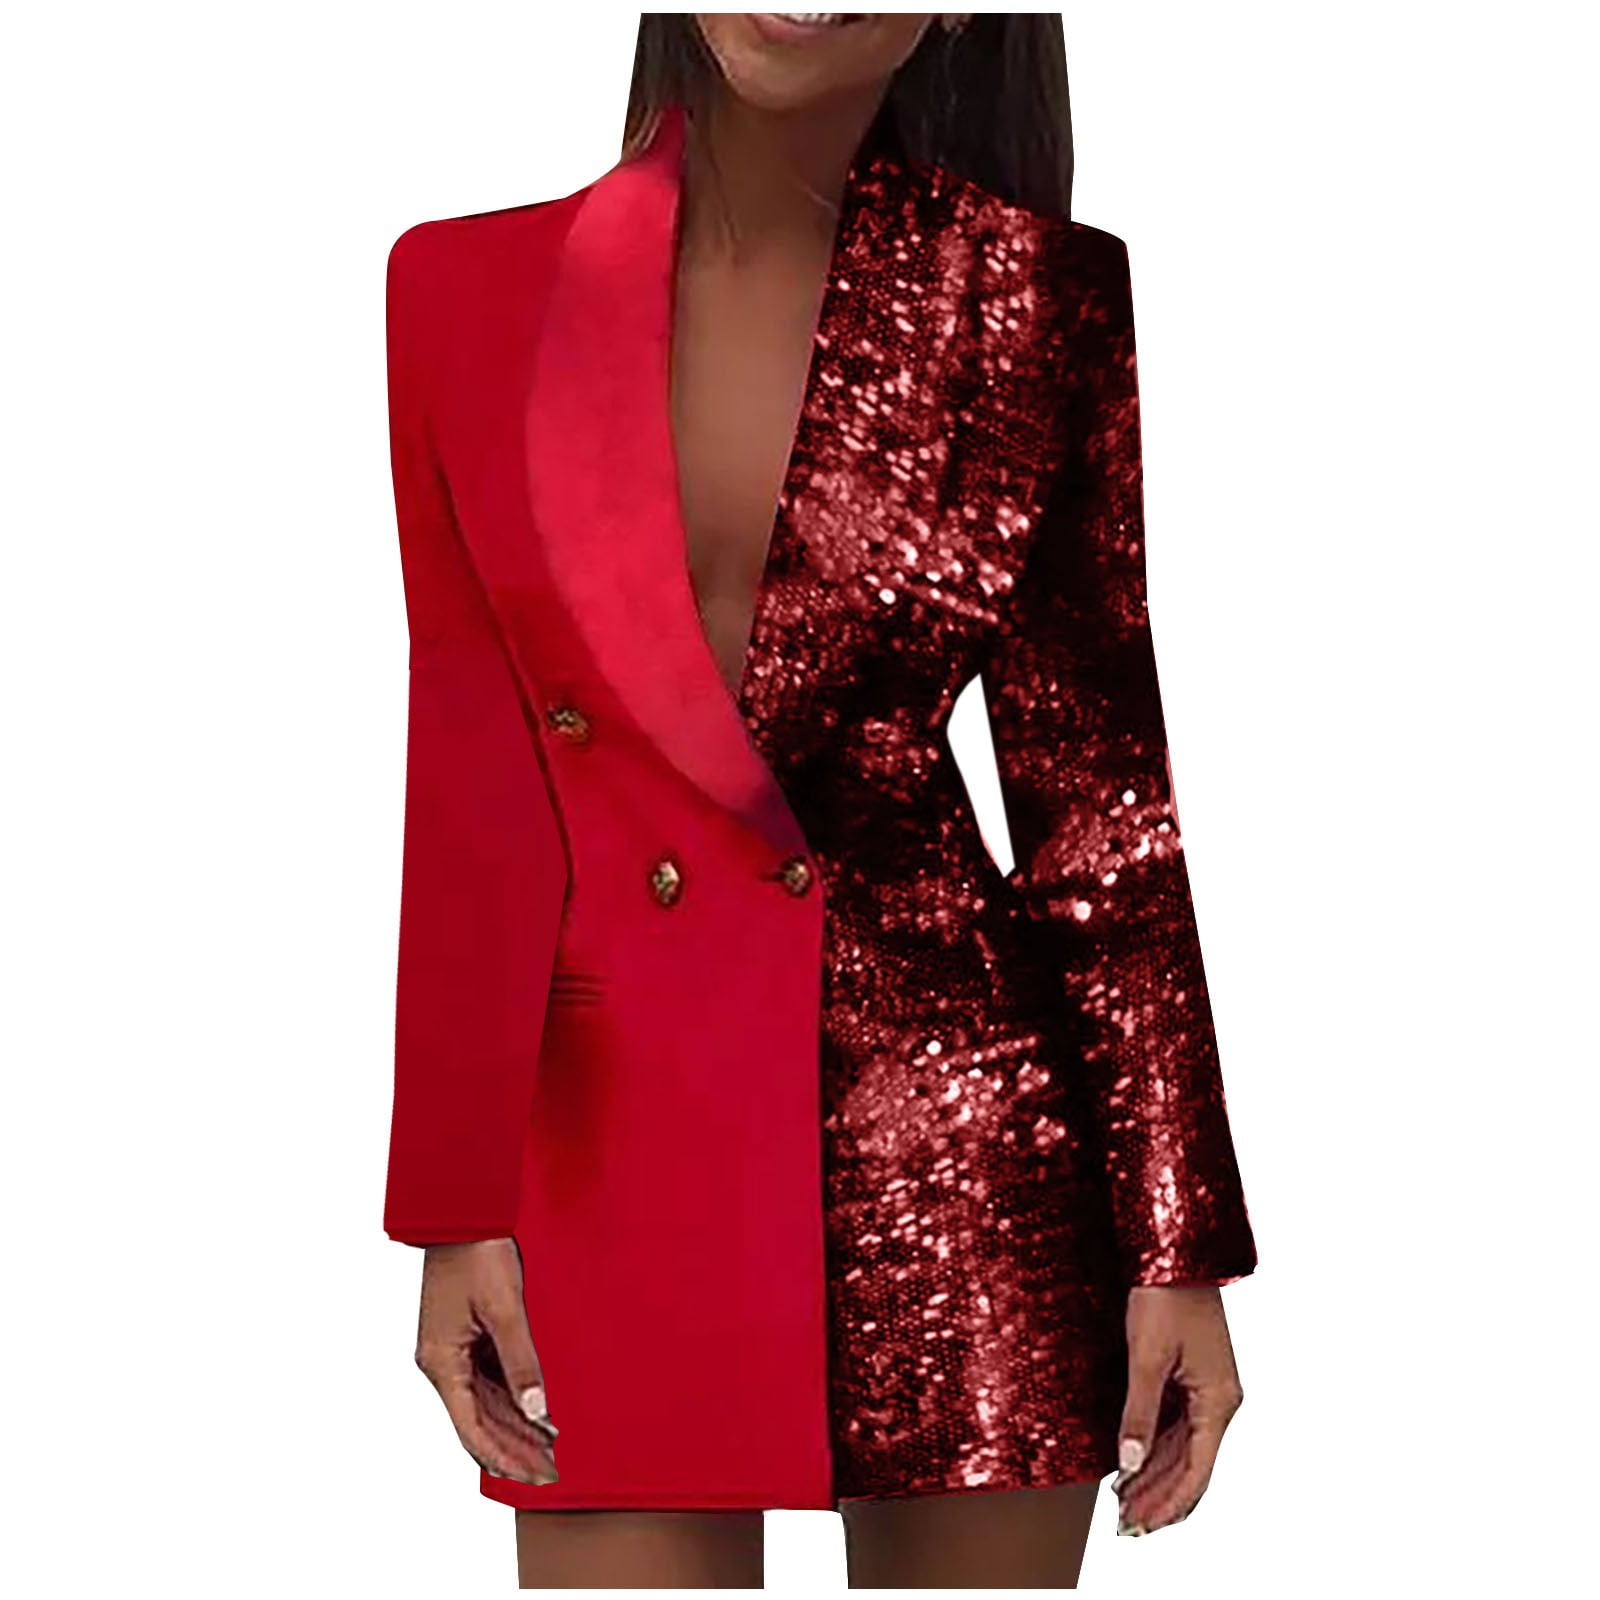 Safuny Women's Mini Suit Coat Dress Solid Sequins Shiny Holiday Trendy Dresses Long Sleeve Elegant Cocktail Wedding Evening Party Lapel Button Red